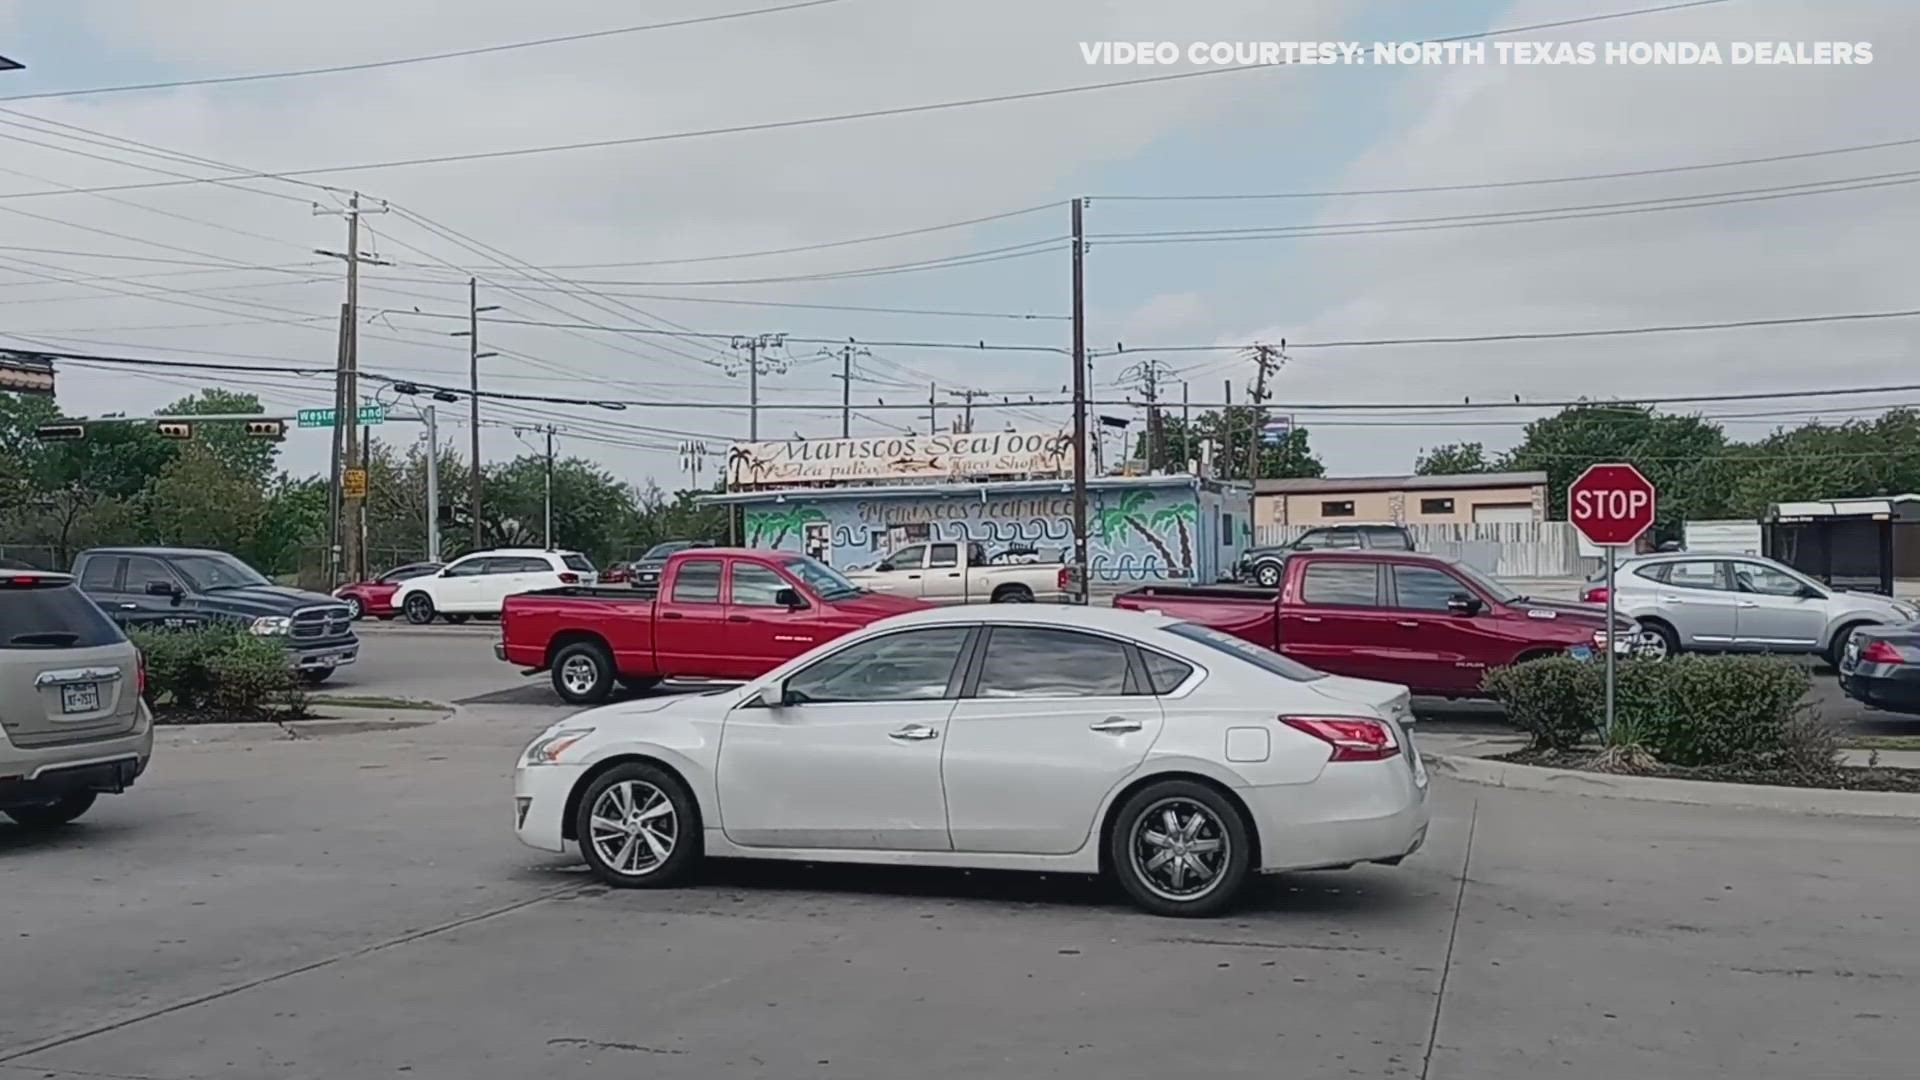 The North Texas Honda Dealers helped provide hundreds of people with free gas on Labor Day due to Hurricane Ida impacting gas and oil production on the Gulf Coast.